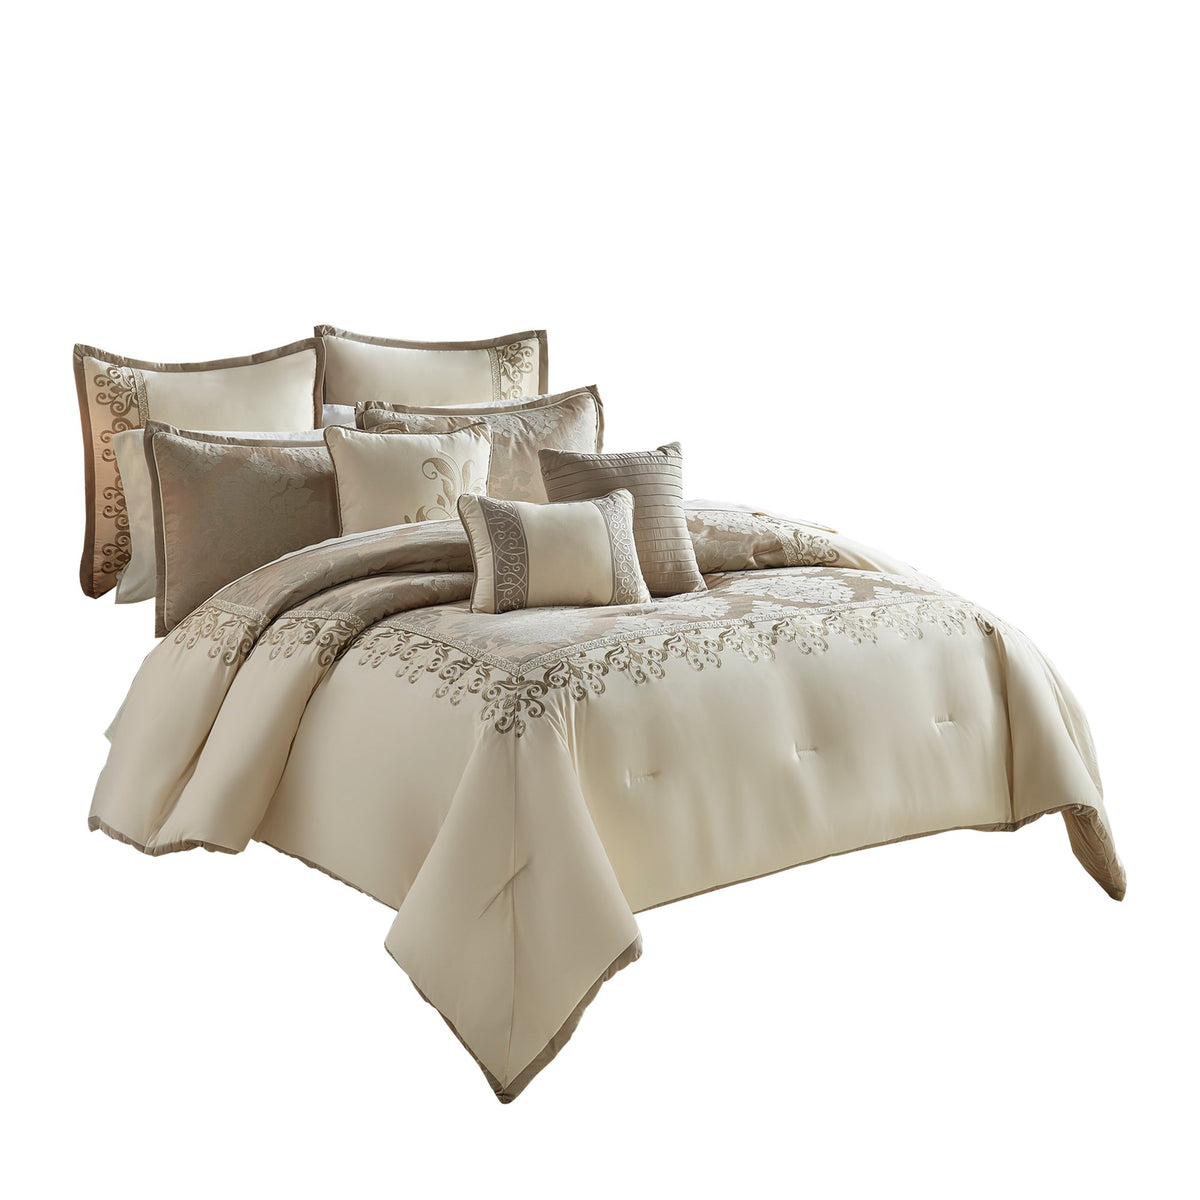 10 Piece King Polyester Comforter Set with Damask Print, Cream and Gold - BM225169